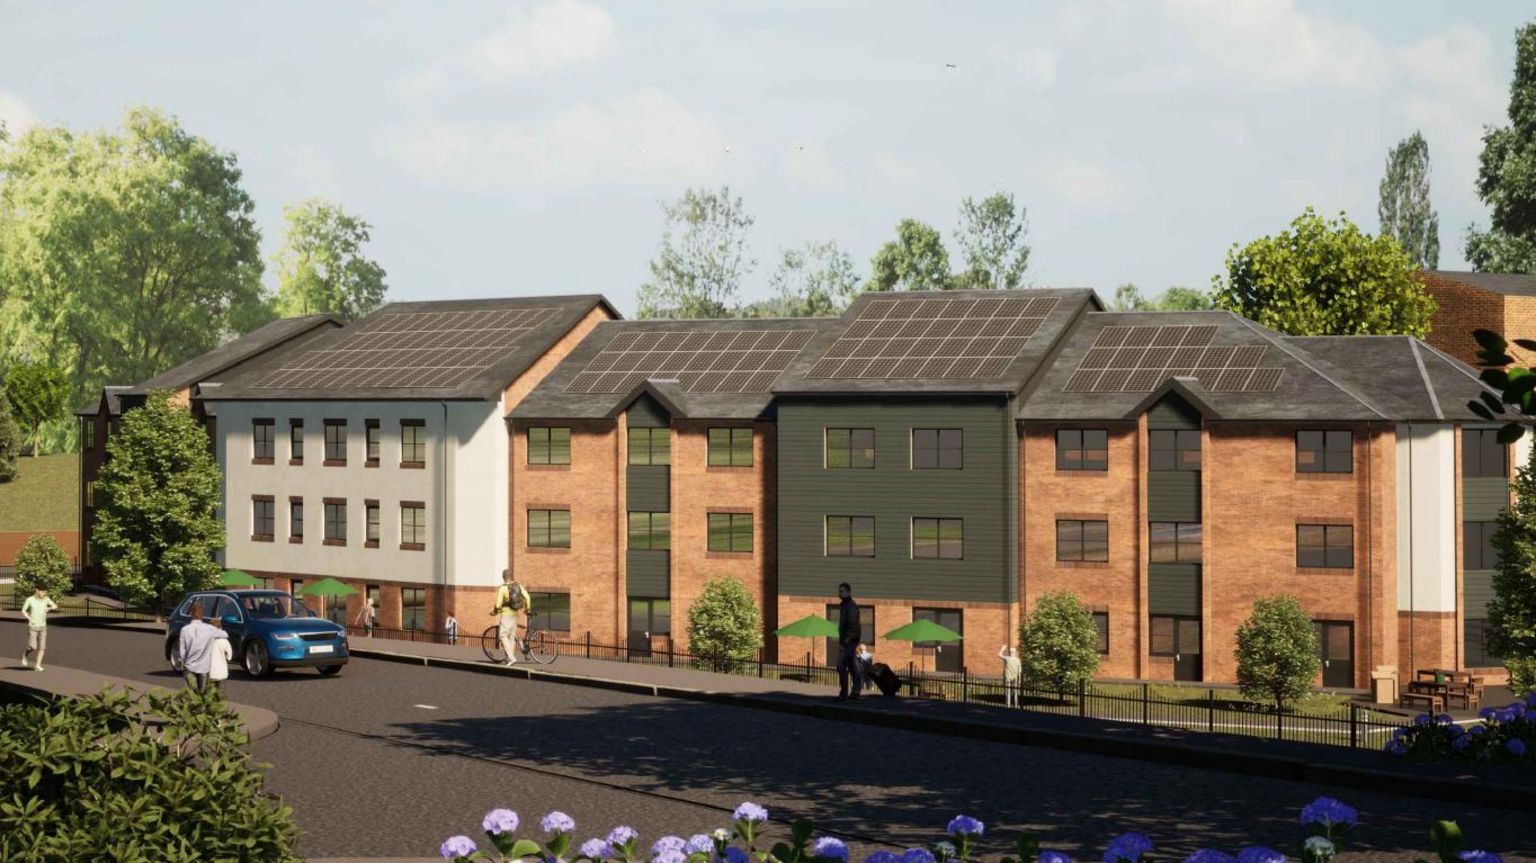 The proposed care home in Shipley, Derbyshire, on the former American Adventure theme park site